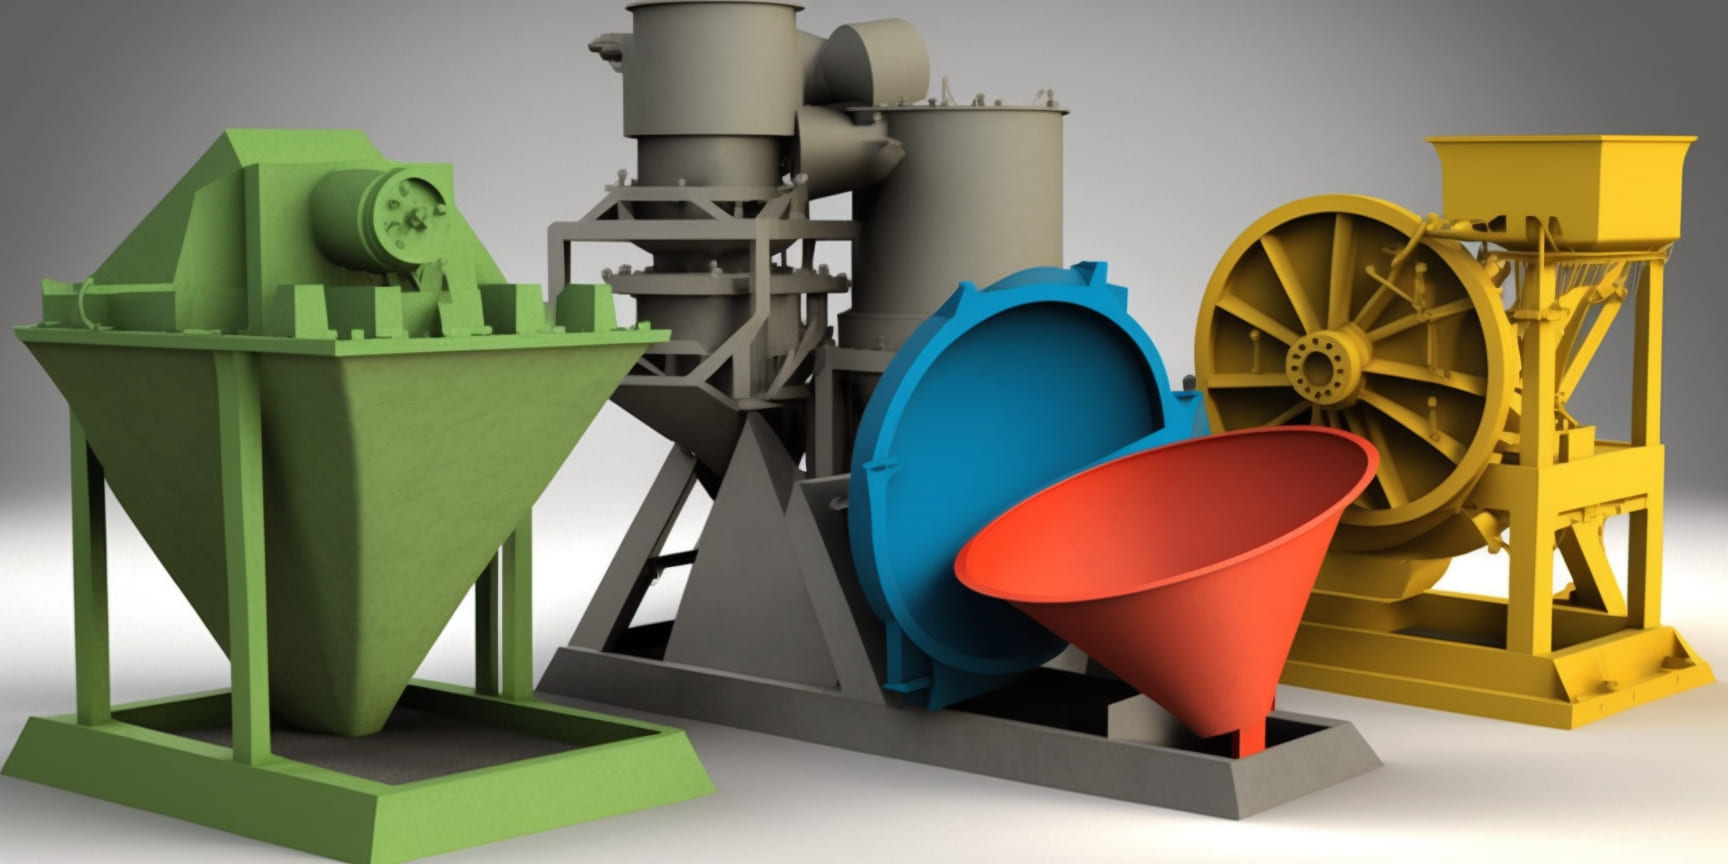 different types of vibrating screens